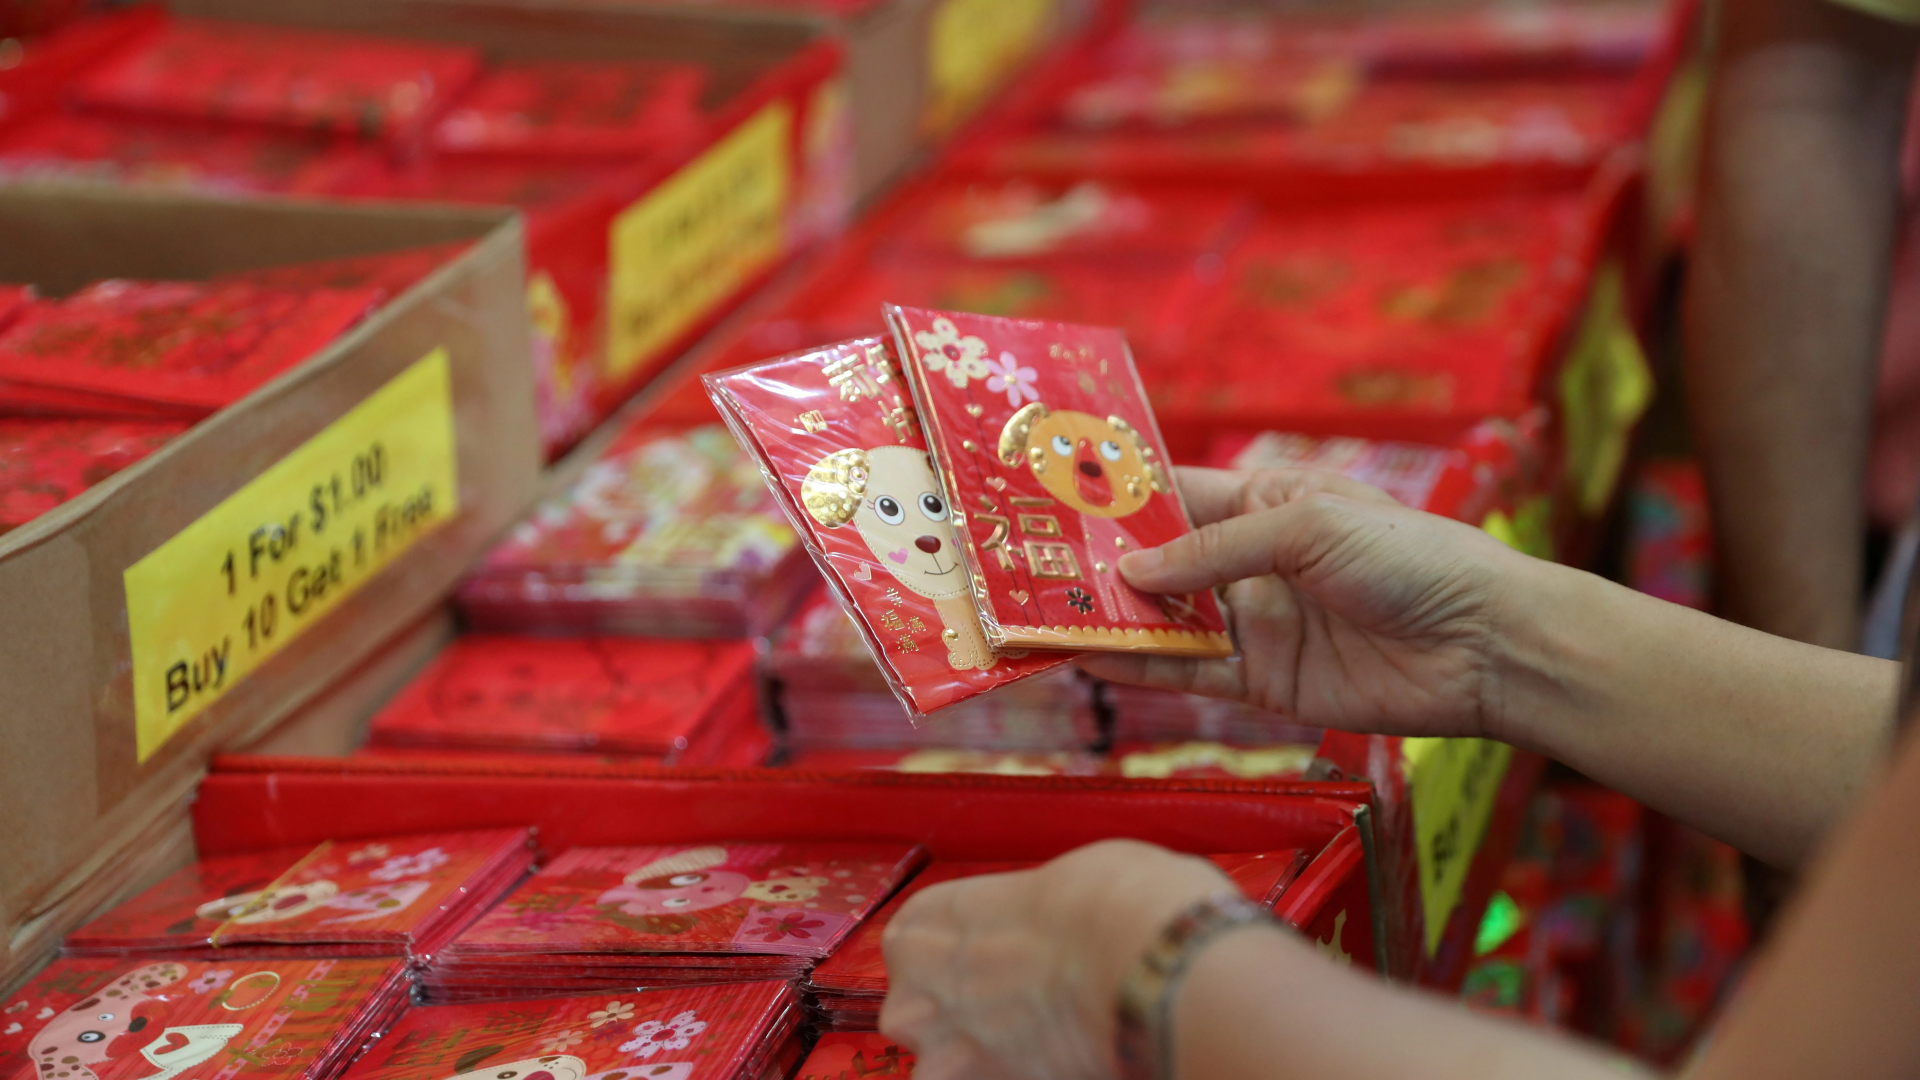 singapore promotes digital monetary gifts facilitating the gift giving tradition in lunar new year